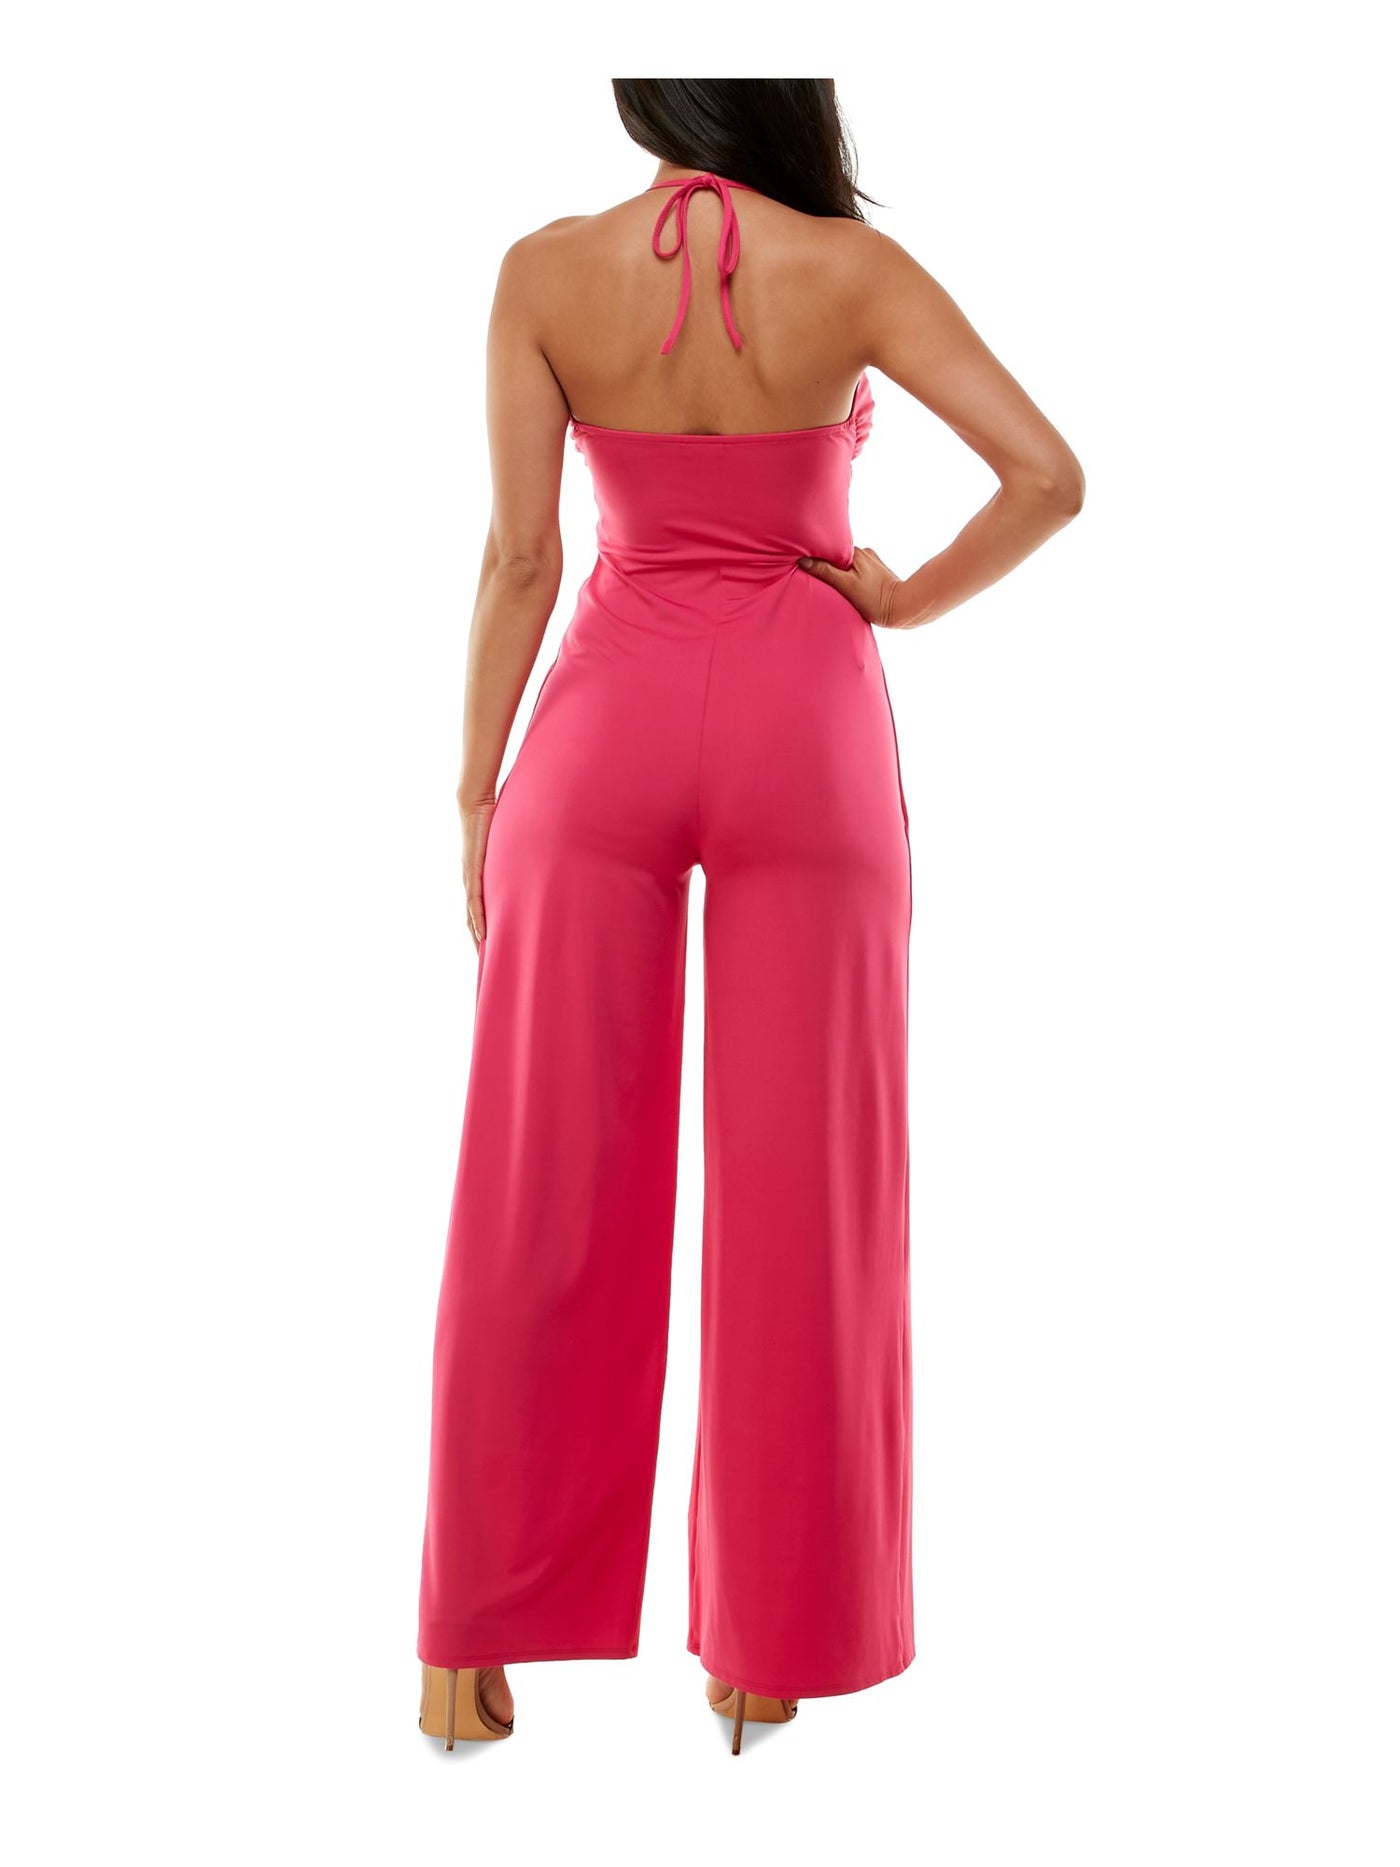 BEBE Womens Pink Slitted V Wire Tie Pull On Strappy Spaghetti Strap Halter Cocktail Wide Leg Jumpsuit  XS